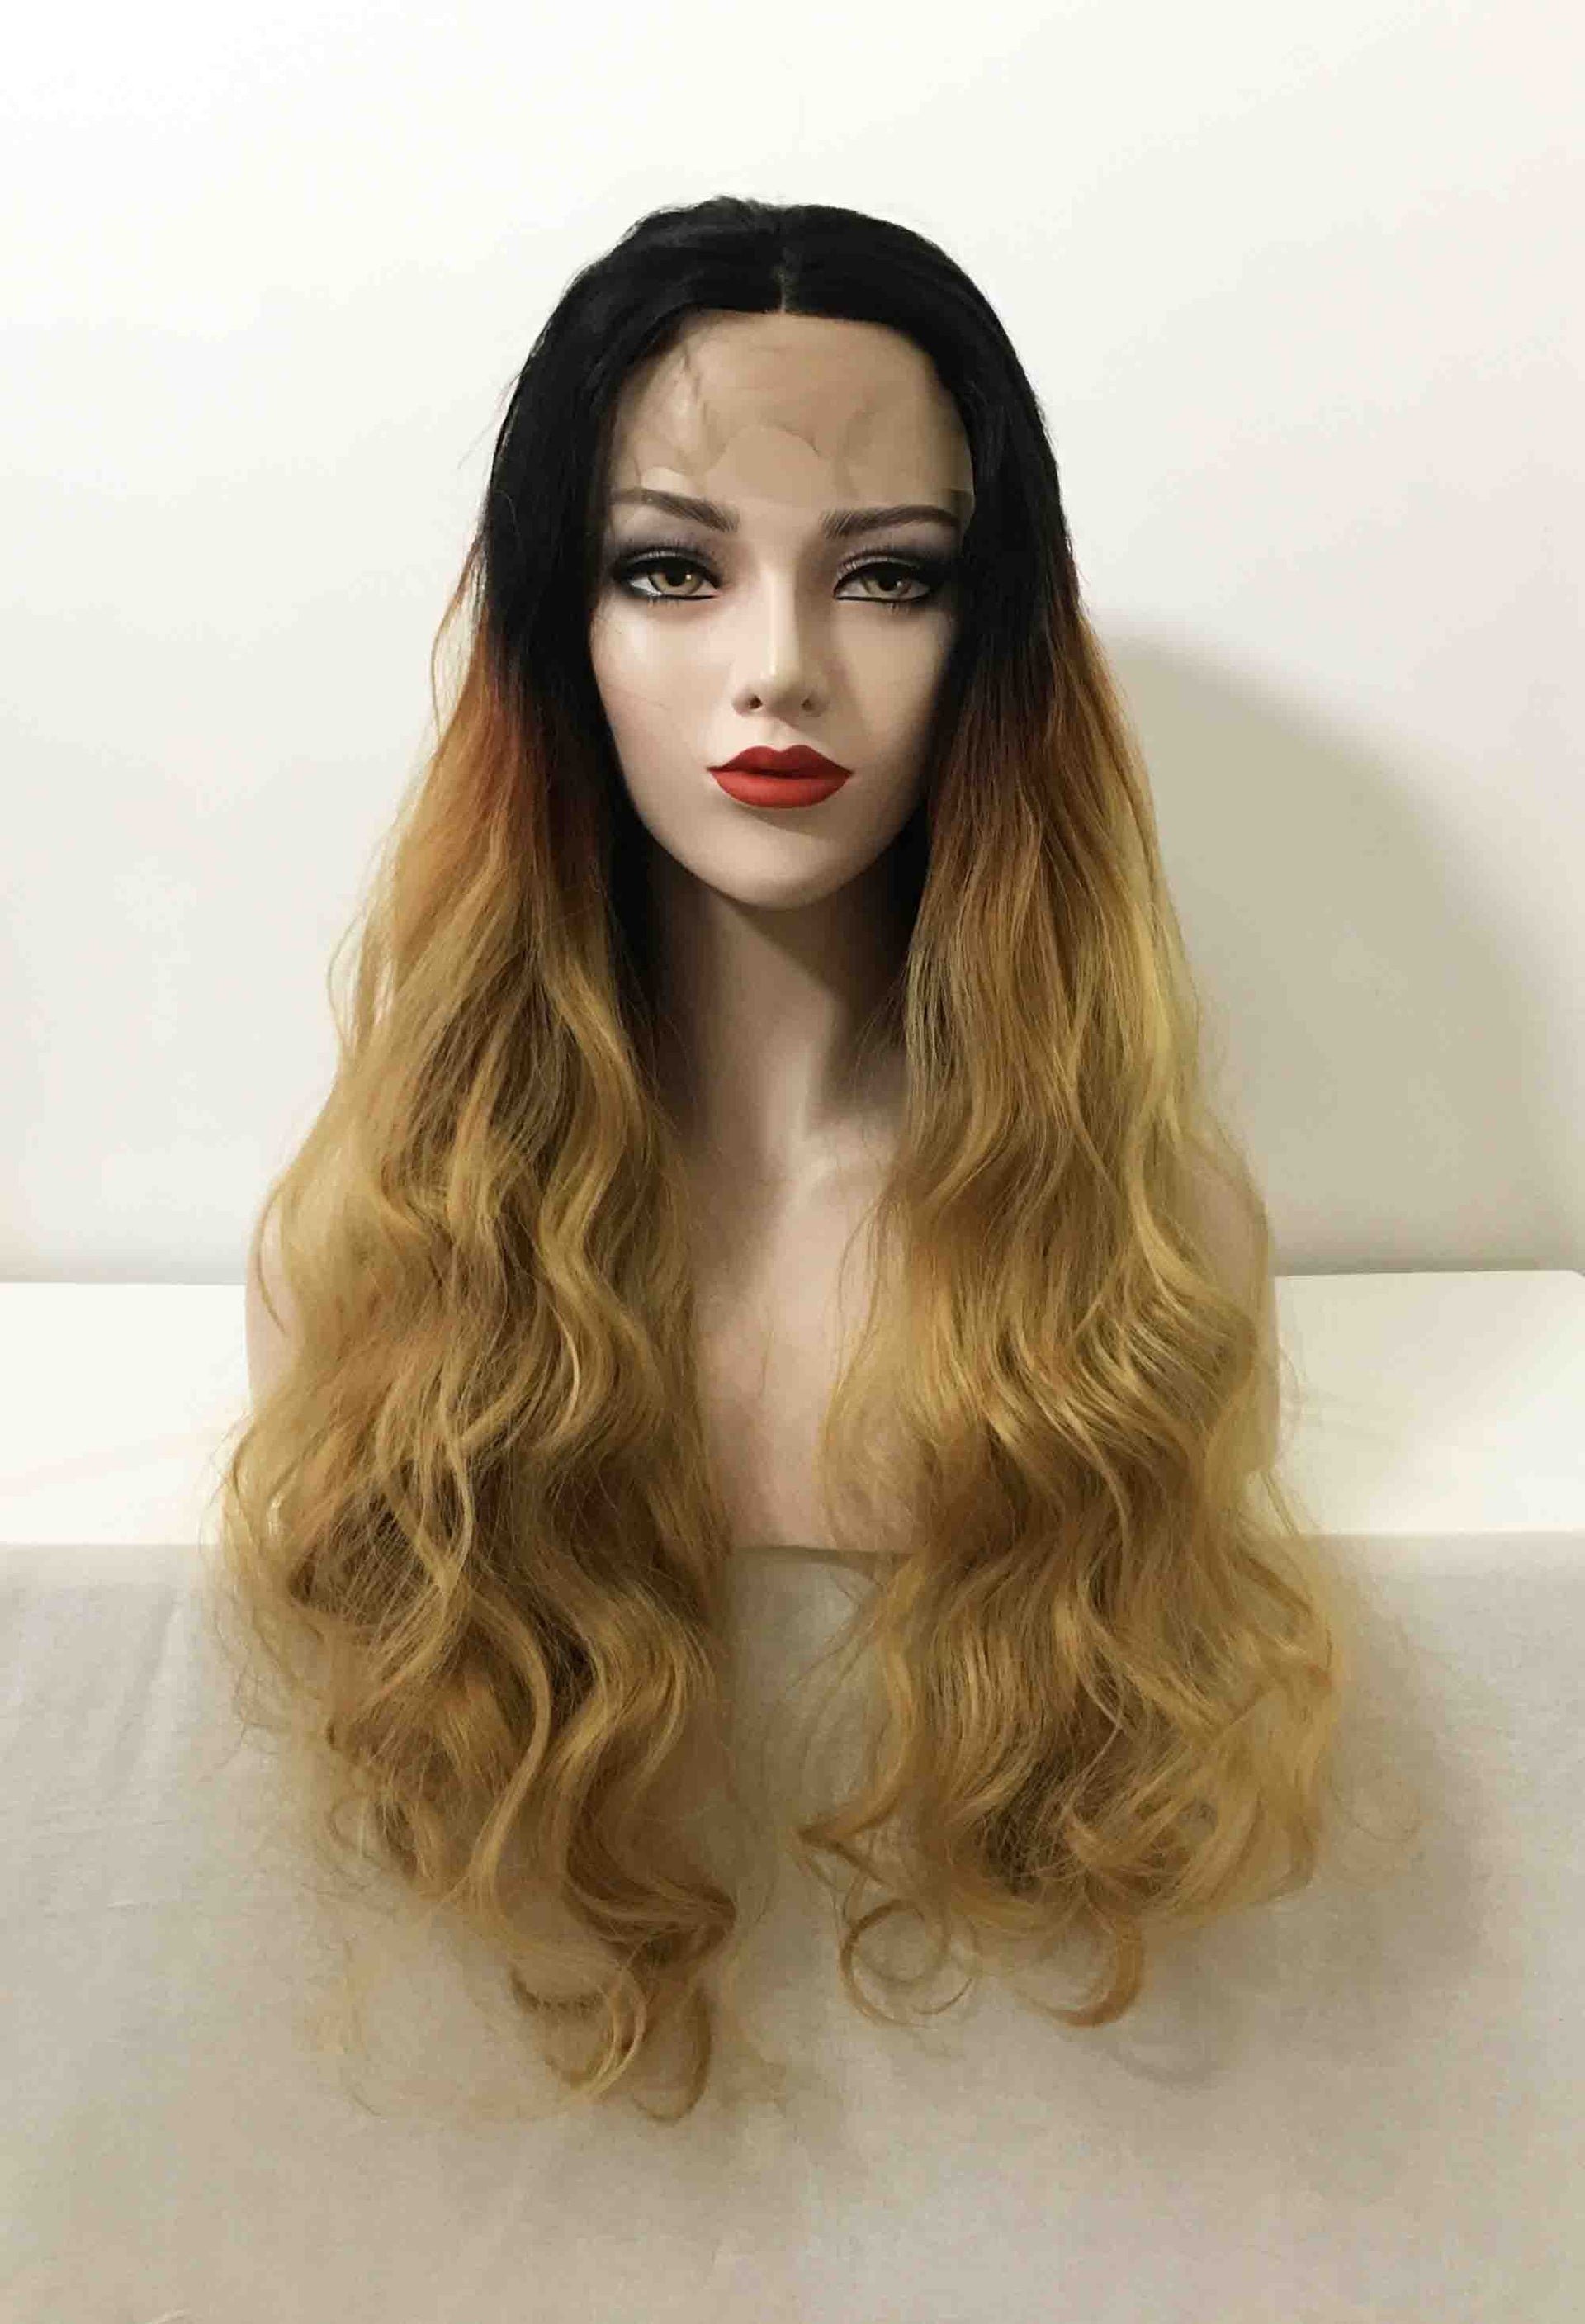 nevermindyrhead Women Ombre Brown Dark Root Lace front Long Curly Middle Part Wig